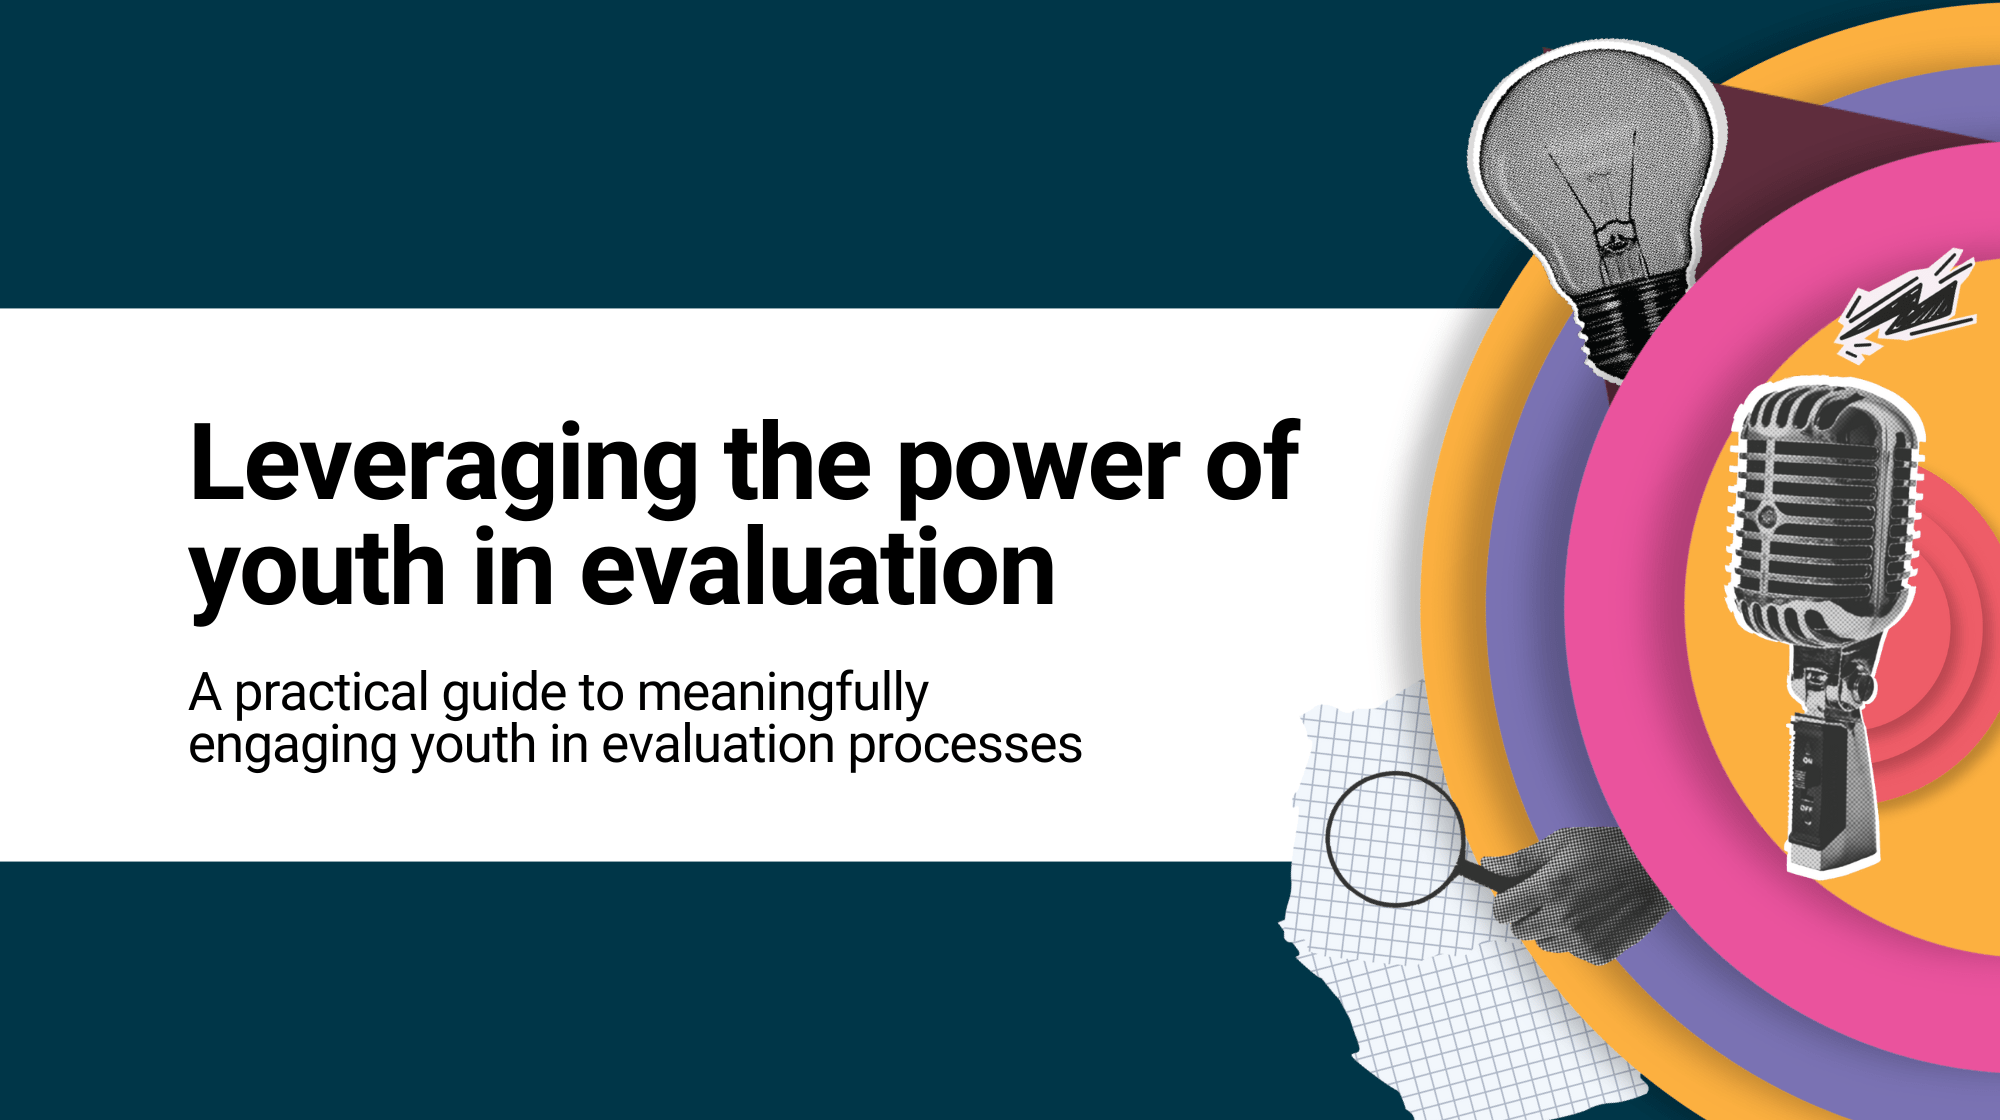 Leveraging the power of youth in evaluation: A practical guide to meaningfully engaging youth in evaluation processes